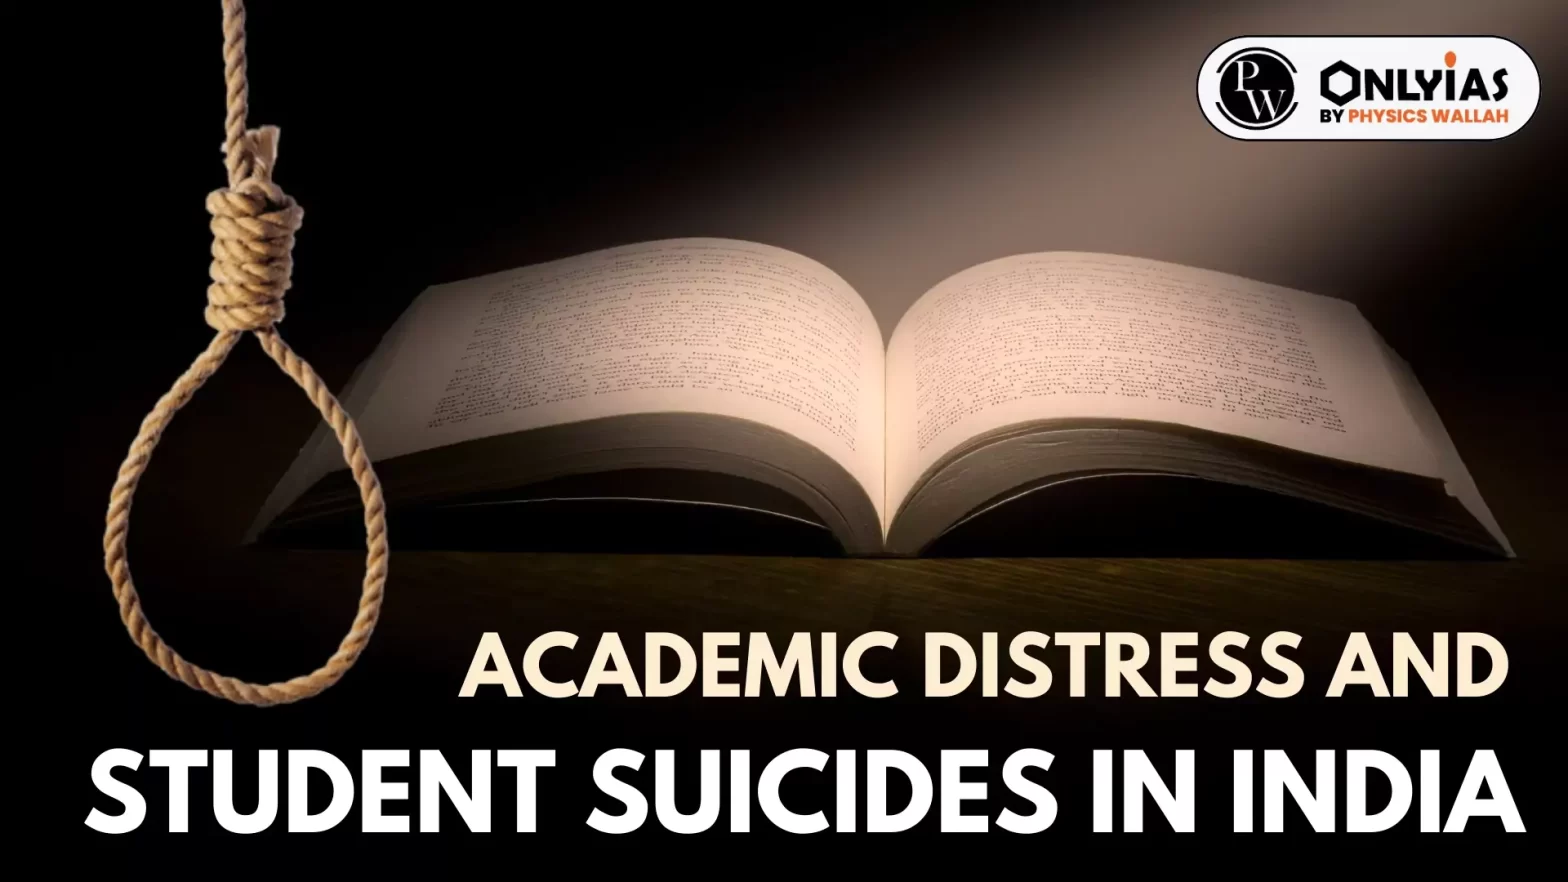 Academic Distress and Student Suicides in India